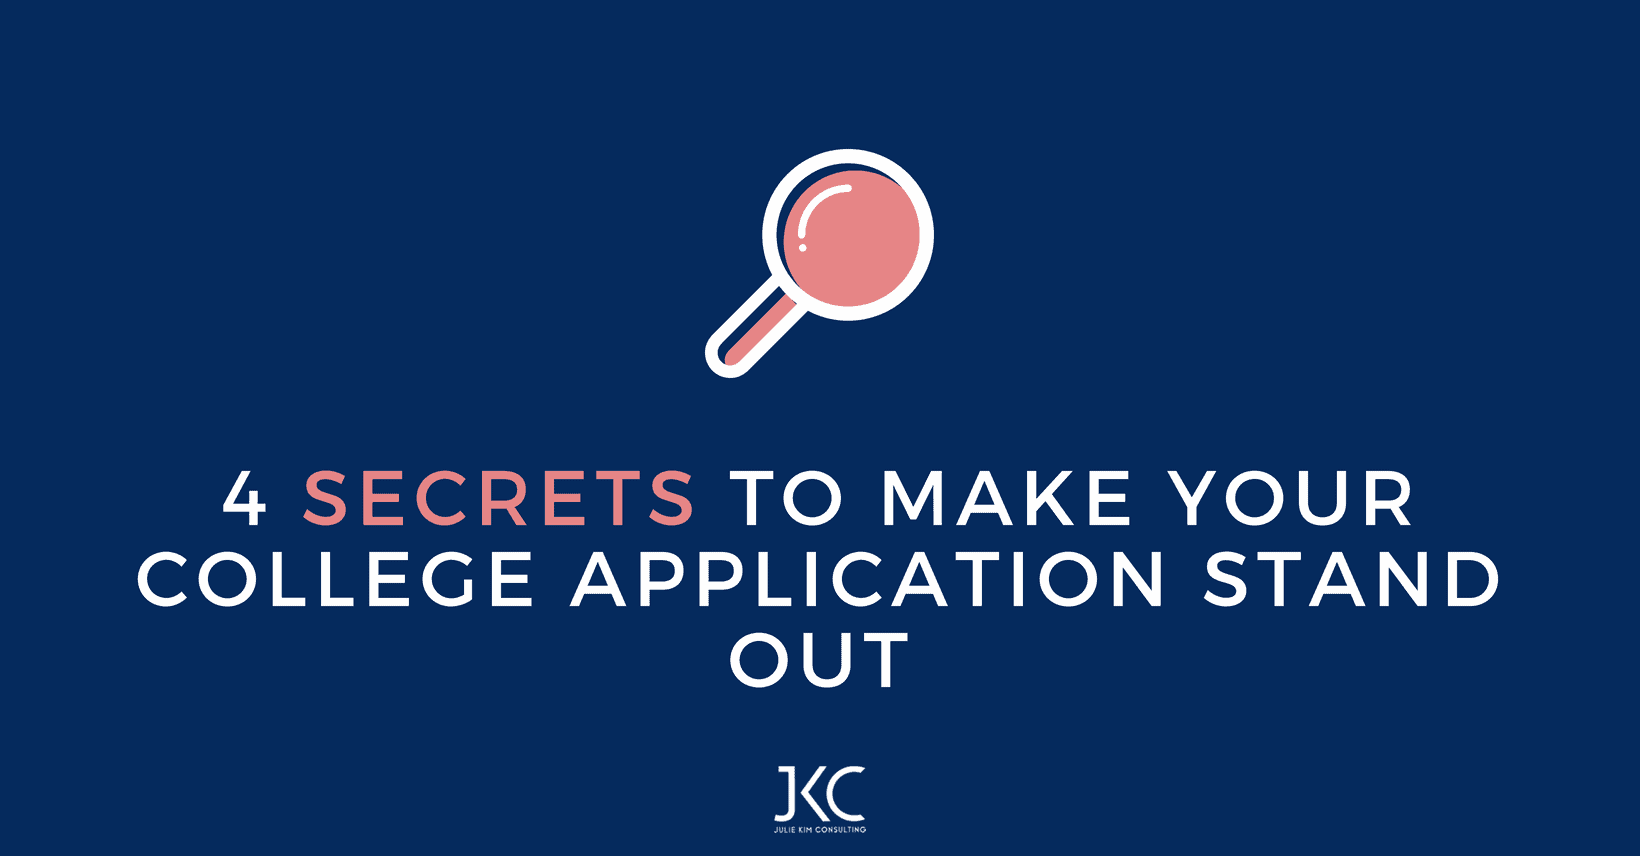 4 Secrets to Make your College Application Stand Out